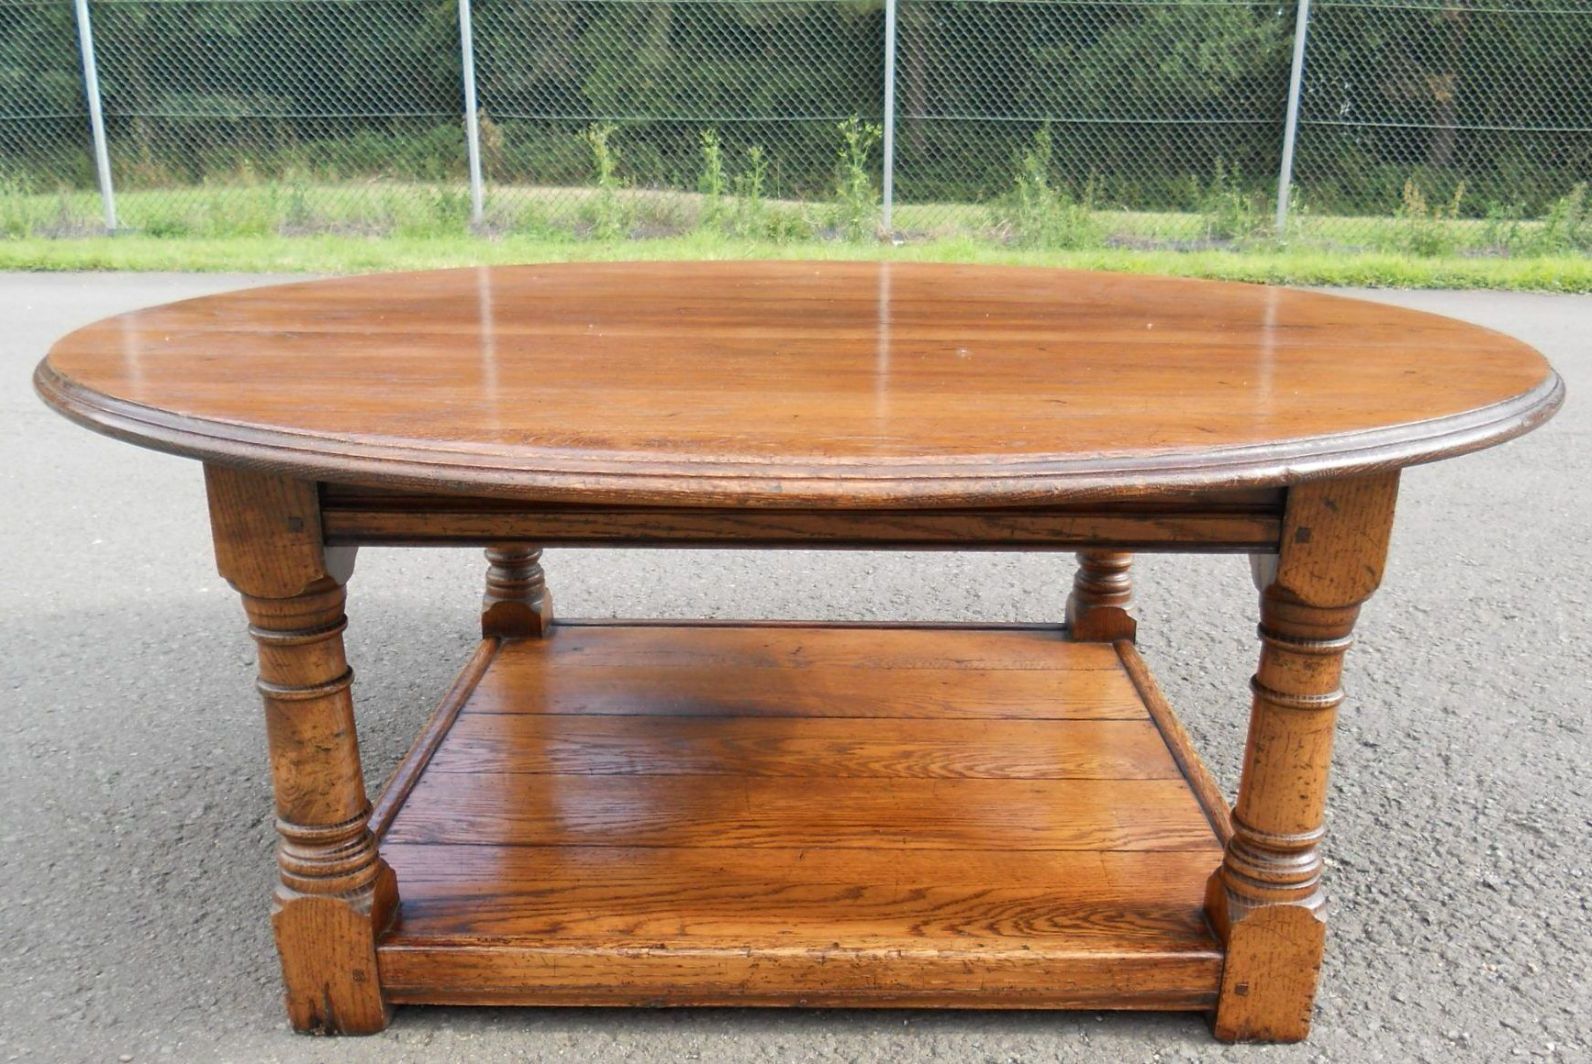 Large Round Oak Coffee Table – Sold Regarding Well Known Round Coffee Tables (View 17 of 20)